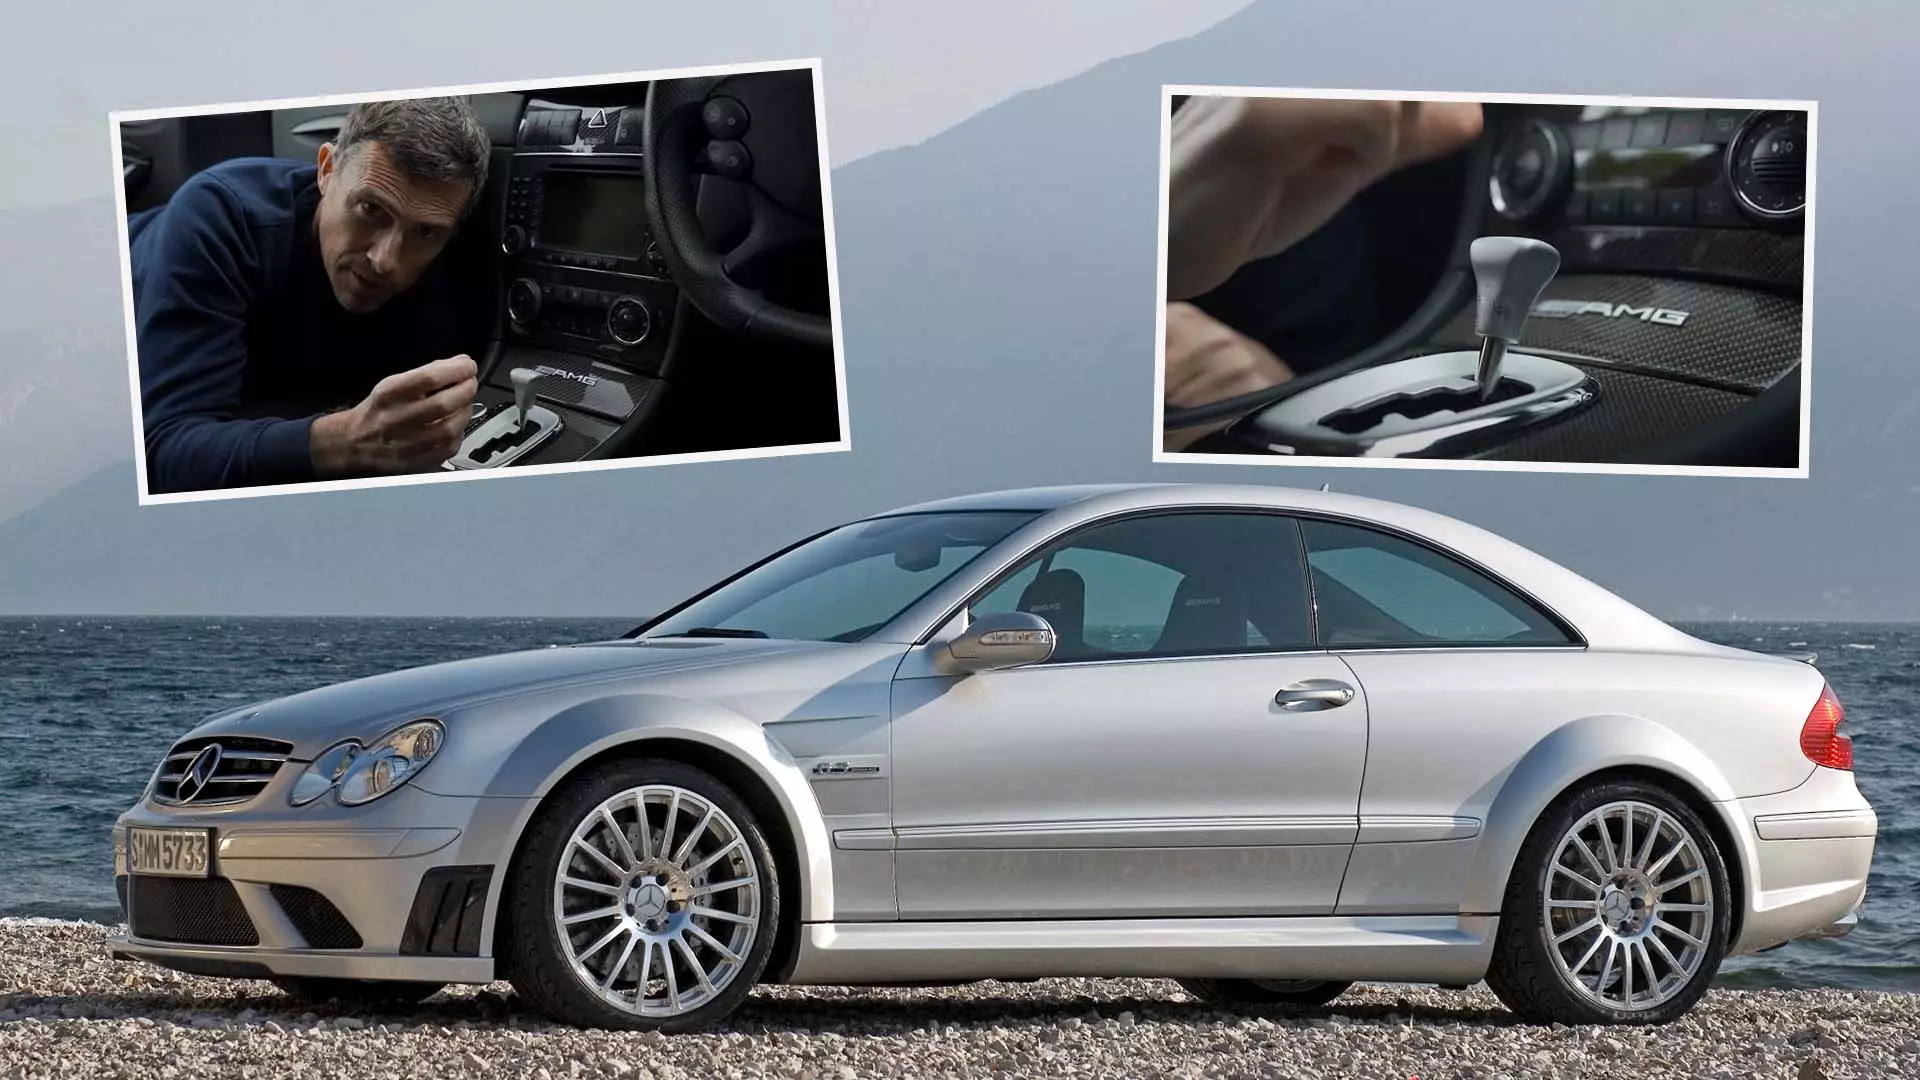 Jeremy Clarkson’s Old CLK 63 Black Series Is Still on the Road Blowing Car Reviewers’ Minds